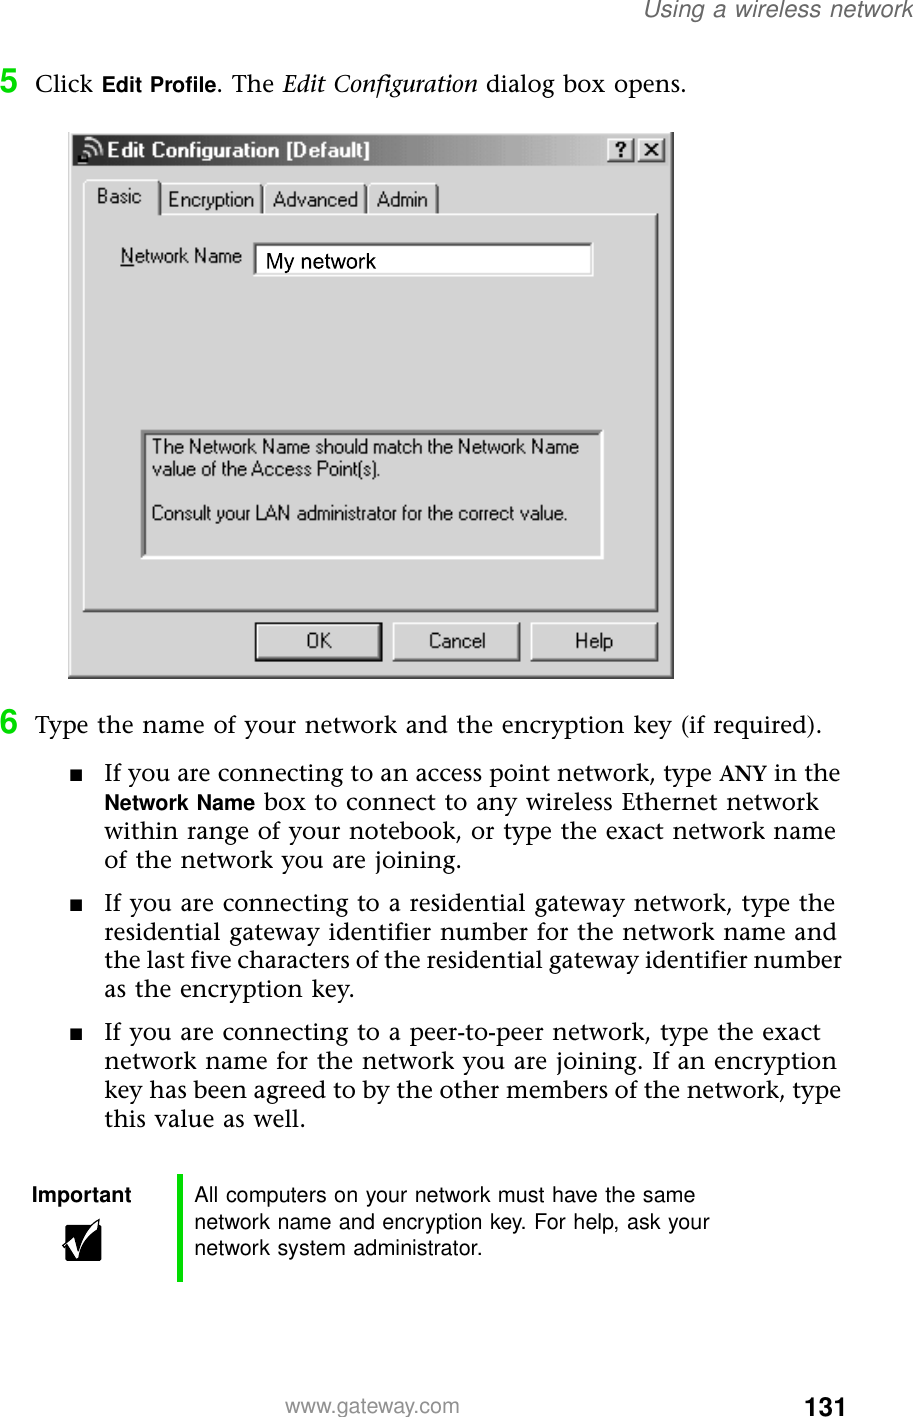 131Using a wireless networkwww.gateway.com5Click Edit Profile. The Edit Configuration dialog box opens.6Type the name of your network and the encryption key (if required).■If you are connecting to an access point network, type ANY in the Network Name box to connect to any wireless Ethernet network within range of your notebook, or type the exact network name of the network you are joining.■If you are connecting to a residential gateway network, type the residential gateway identifier number for the network name and the last five characters of the residential gateway identifier number as the encryption key.■If you are connecting to a peer-to-peer network, type the exact network name for the network you are joining. If an encryption key has been agreed to by the other members of the network, type this value as well.Important All computers on your network must have the same network name and encryption key. For help, ask your network system administrator.